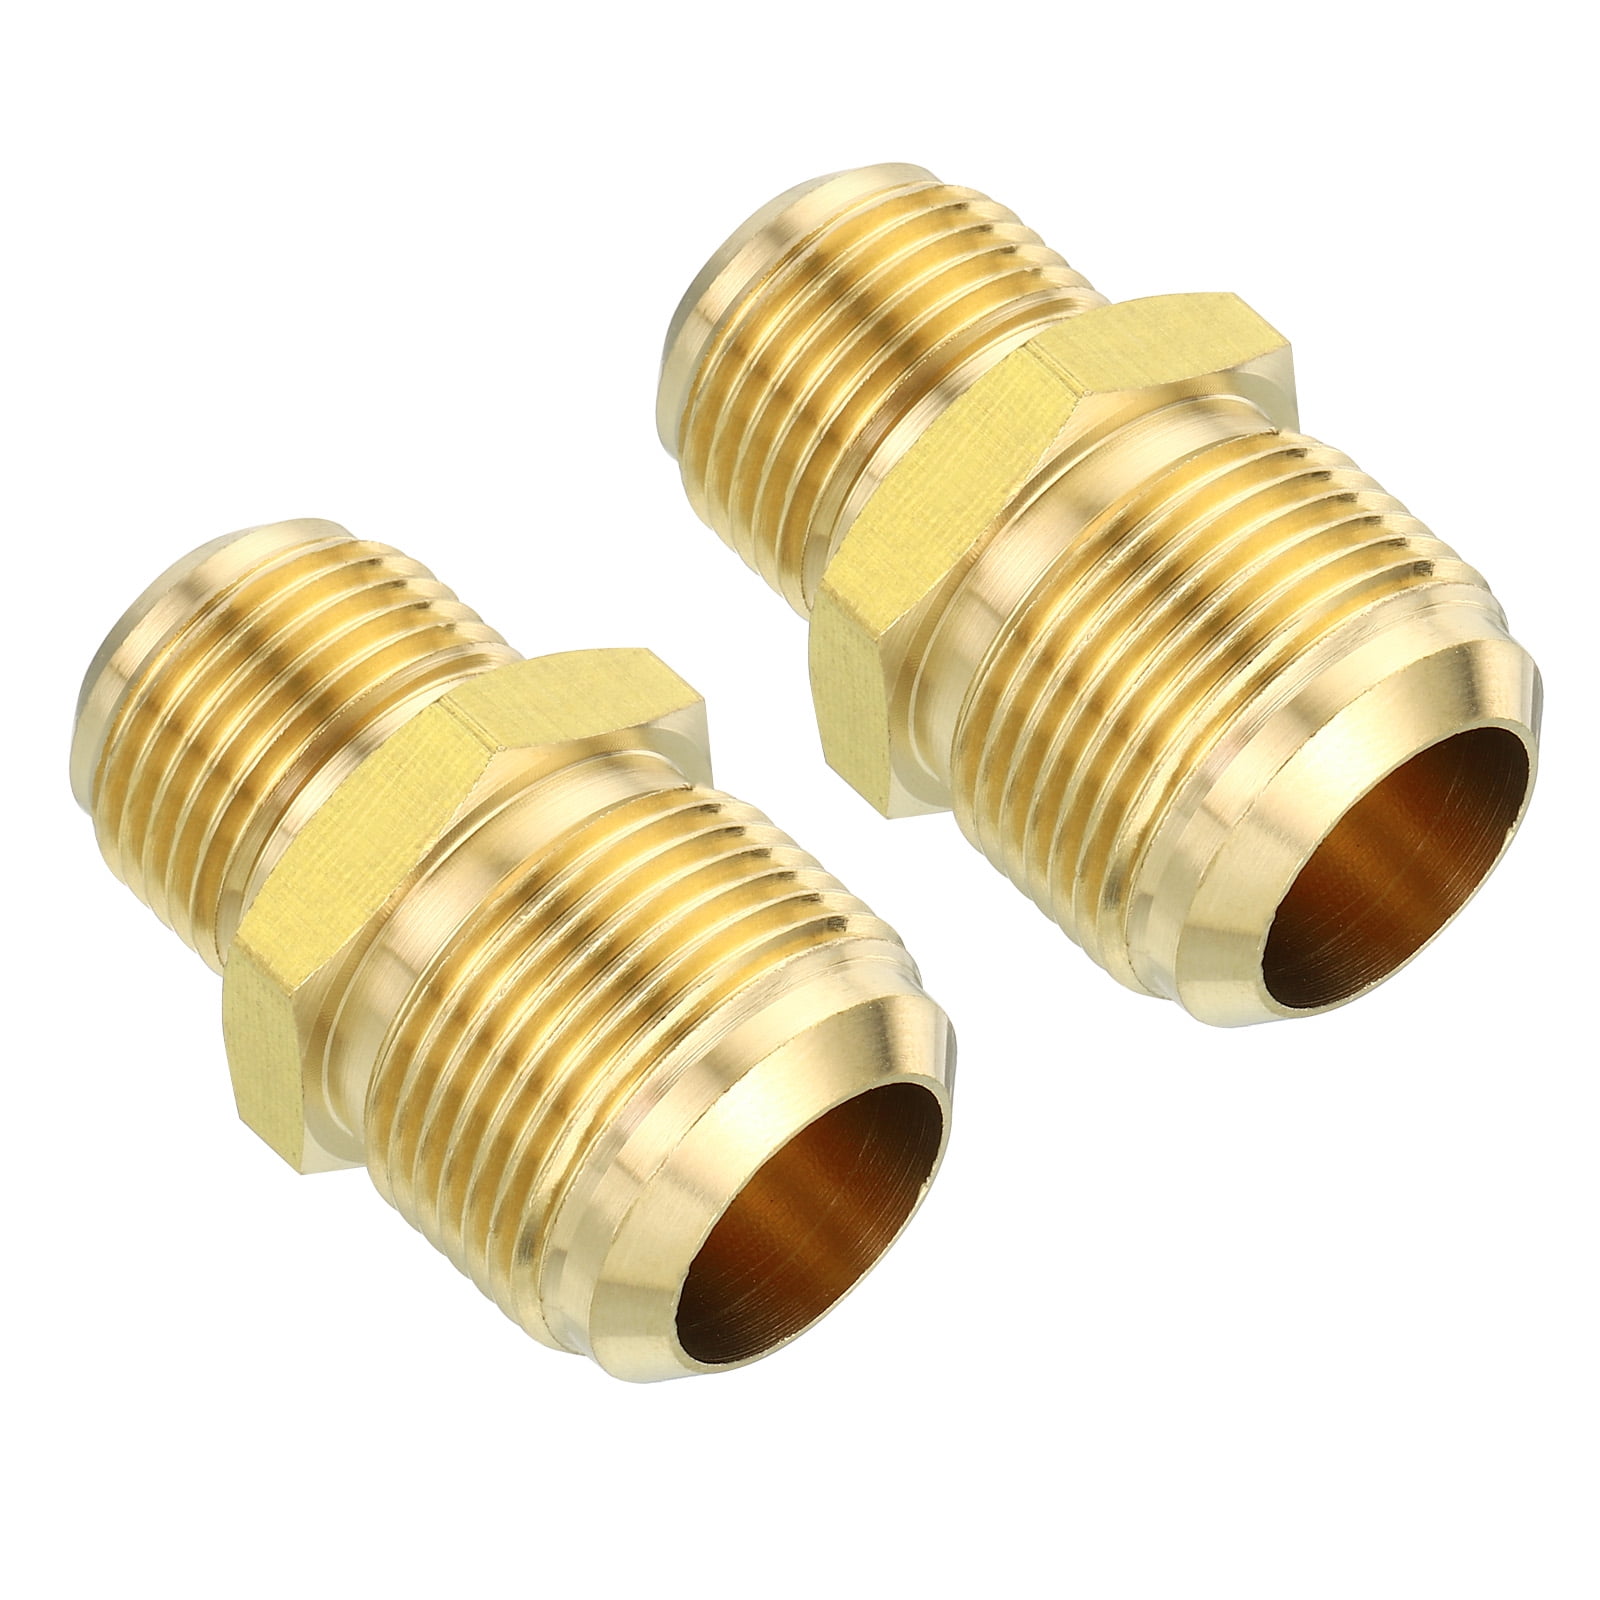 Uxcell 5/8 SAE Male x 3/4 SAE Male Brass Flare Union Connector, 2 Pcs Gas  Adapter Brass Tube Coupler Pipe Fitting